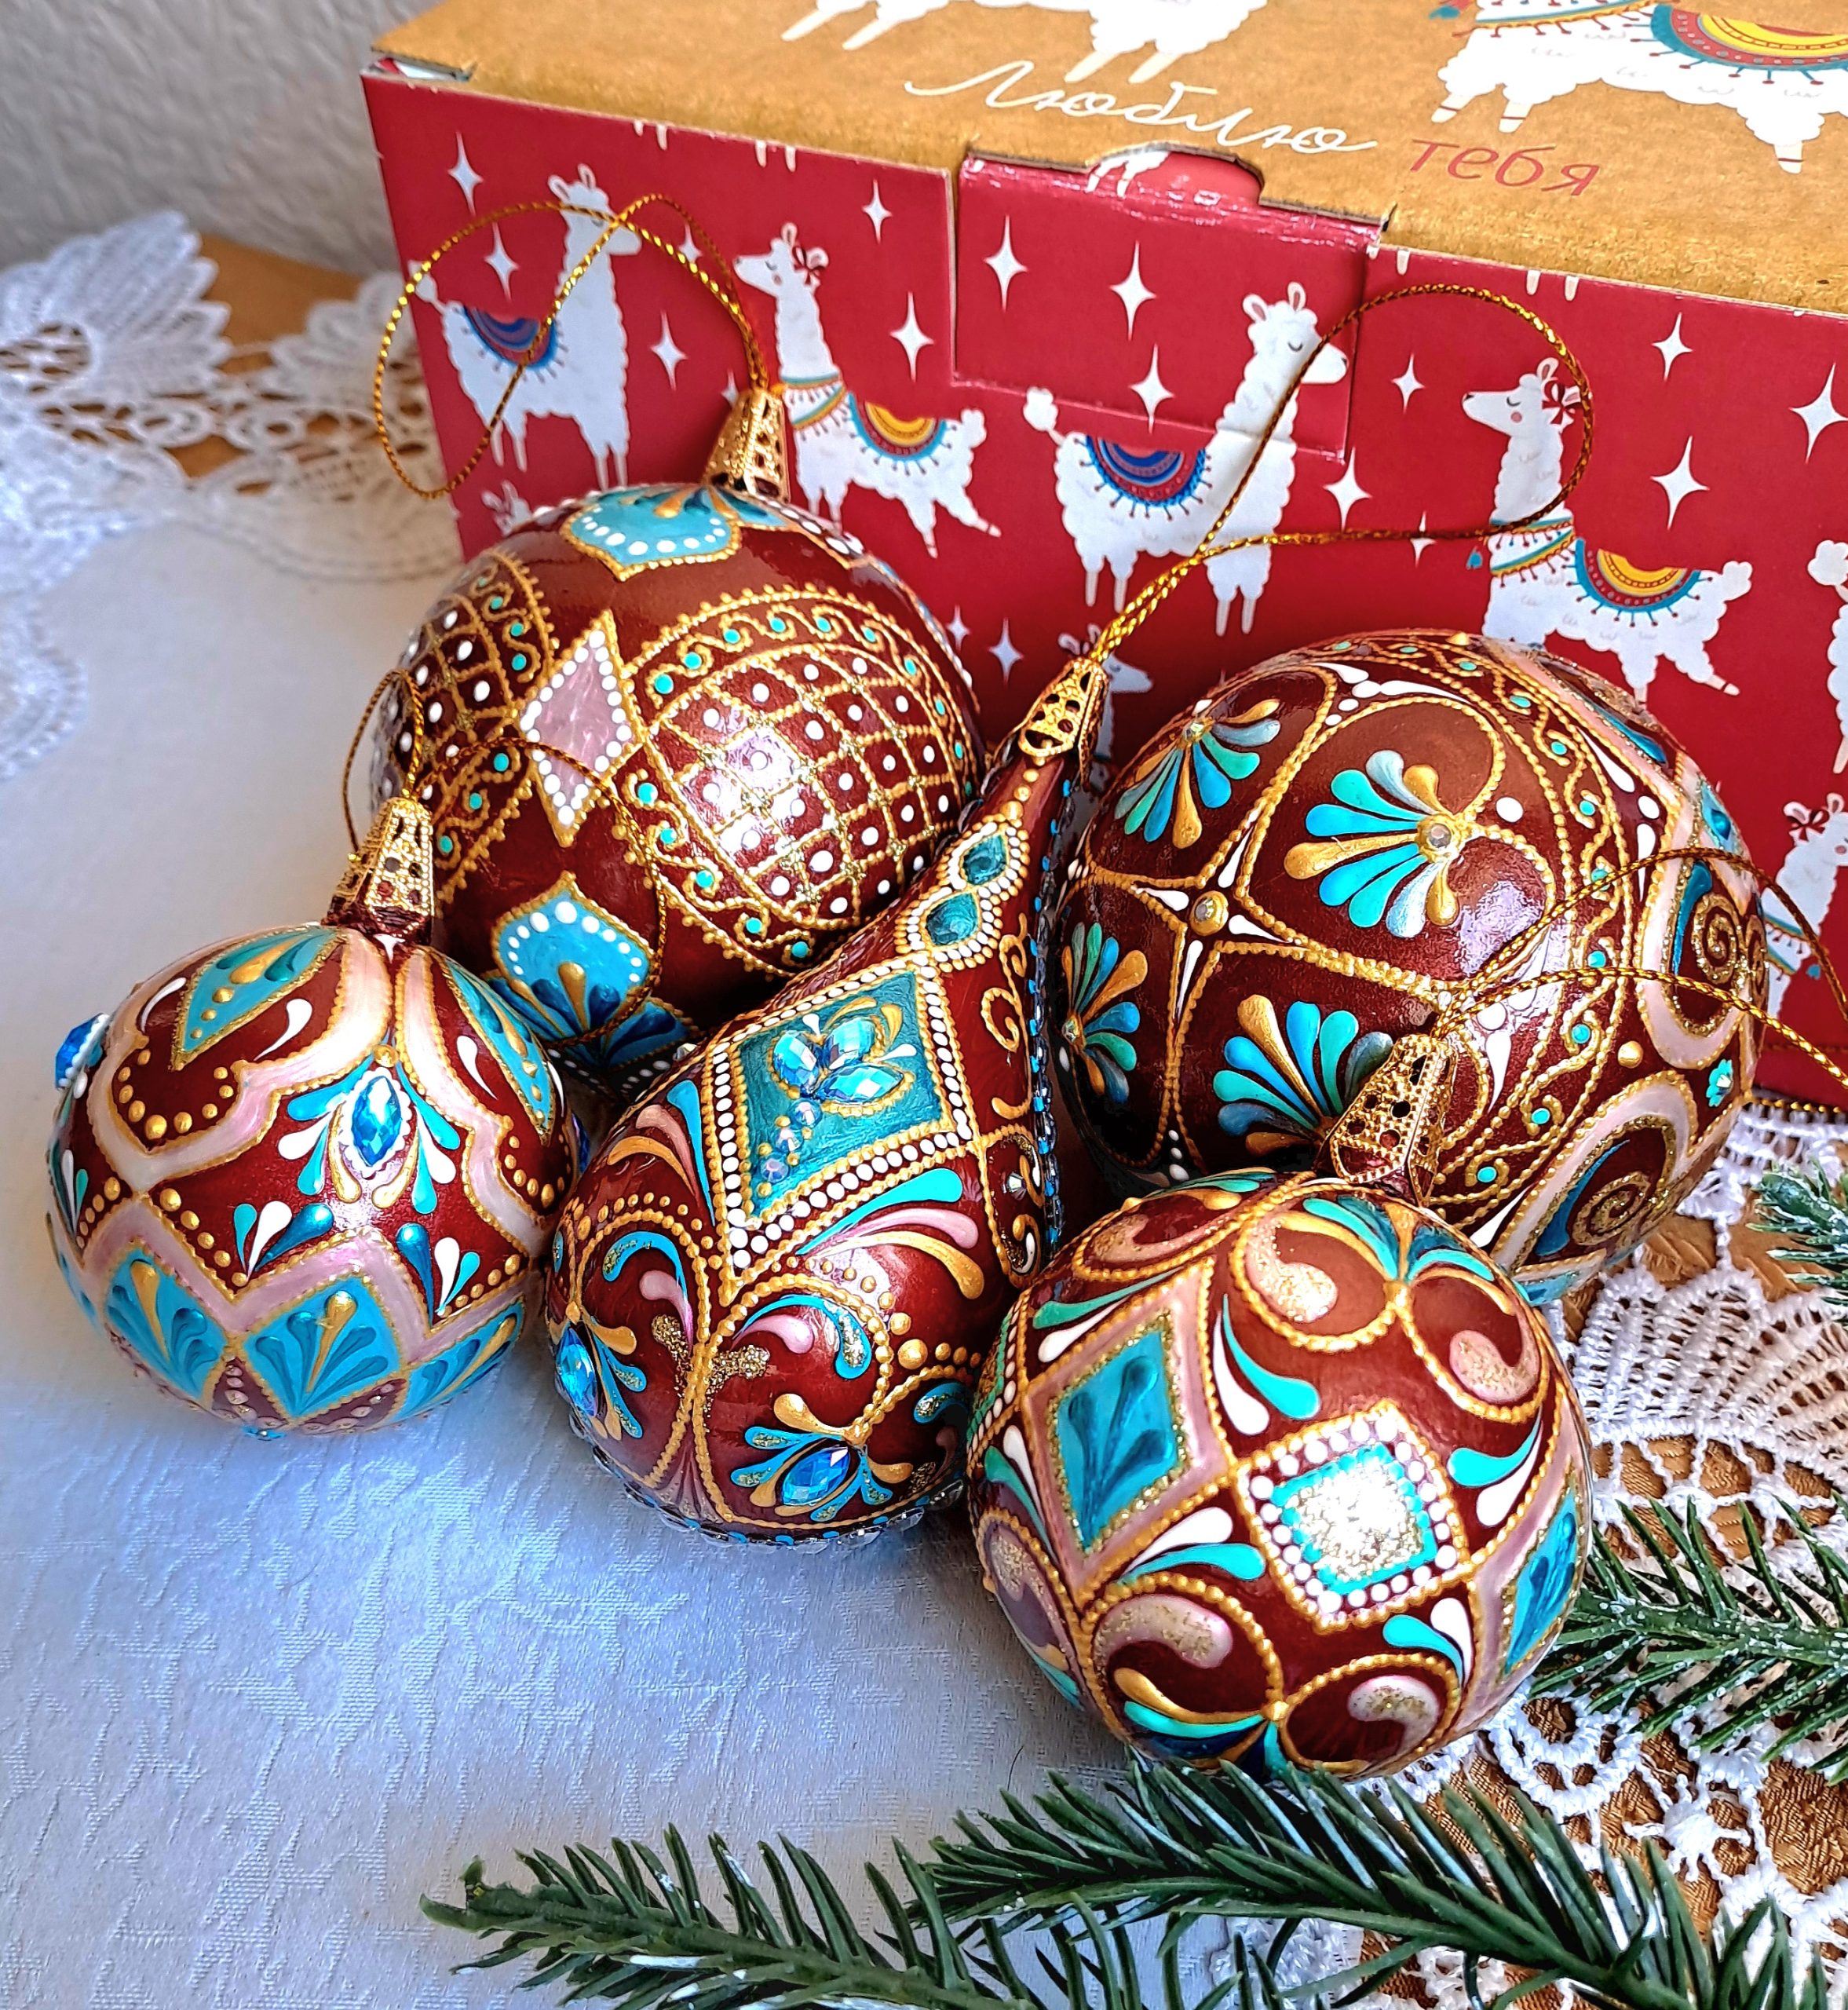 Charming Christmas tree ornaments will create a festive atmosphere in your home.